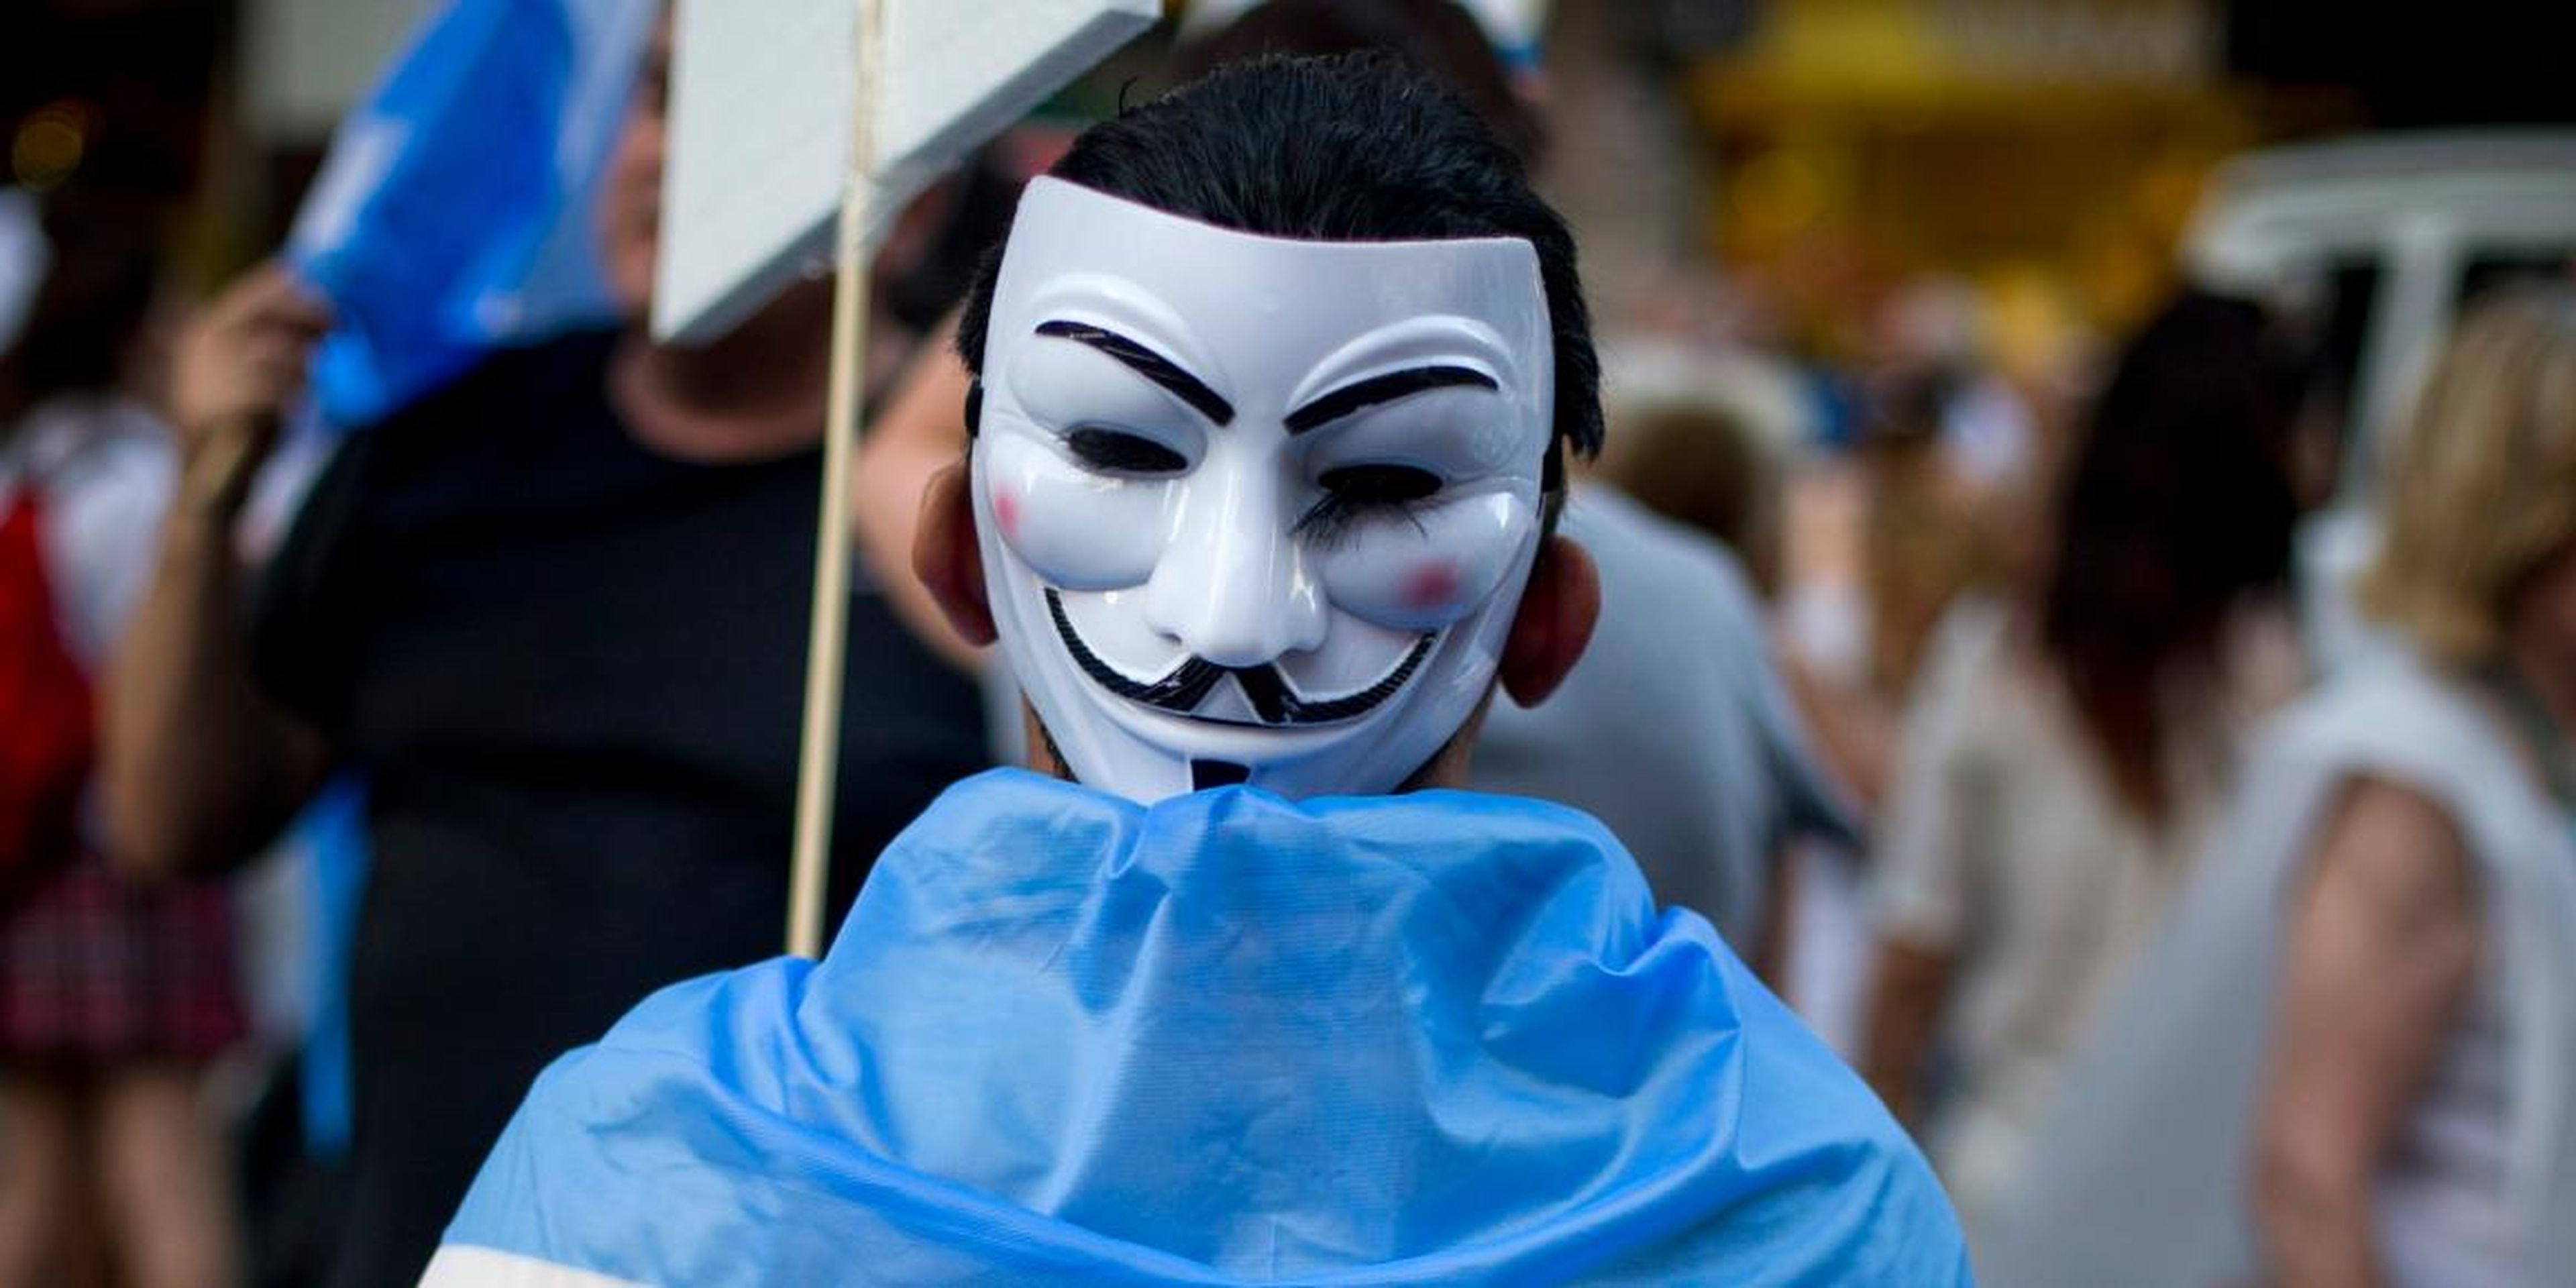 A protesters wearing a mask and an Argentinian flag.